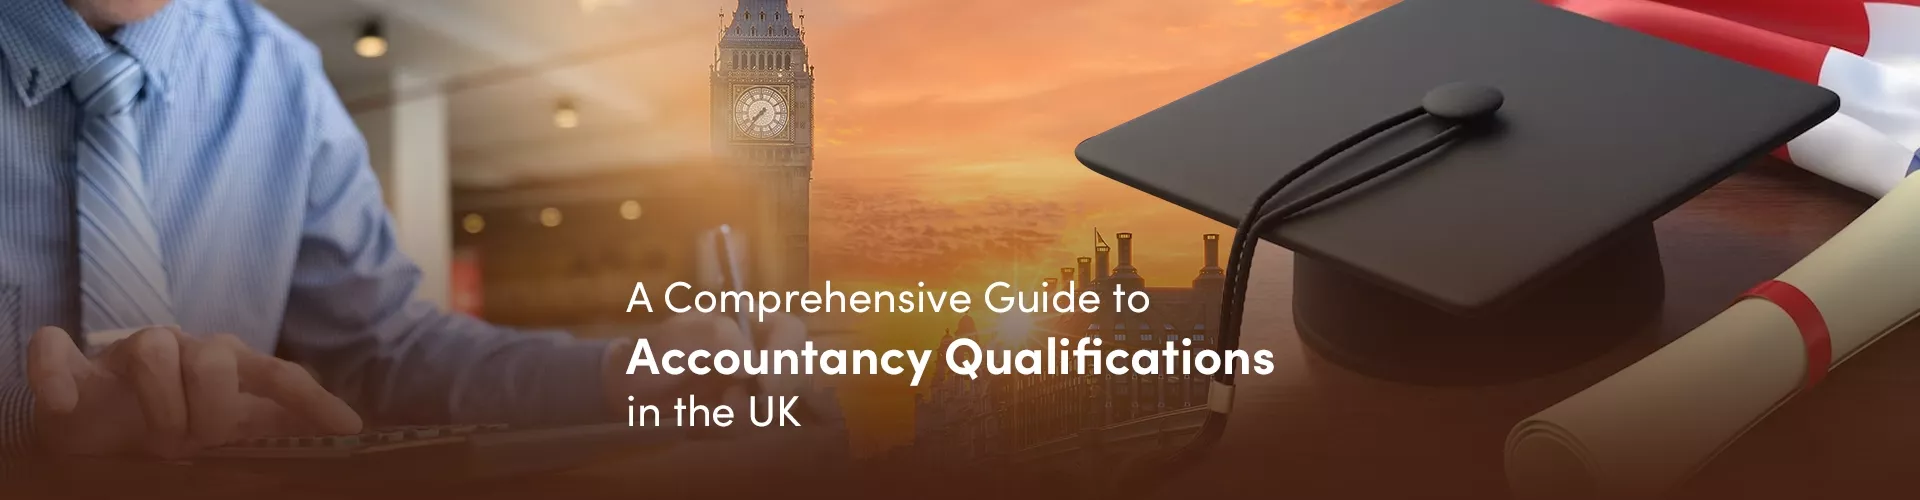 A Comprehensive Guide to Accountancy Qualifications in the UK